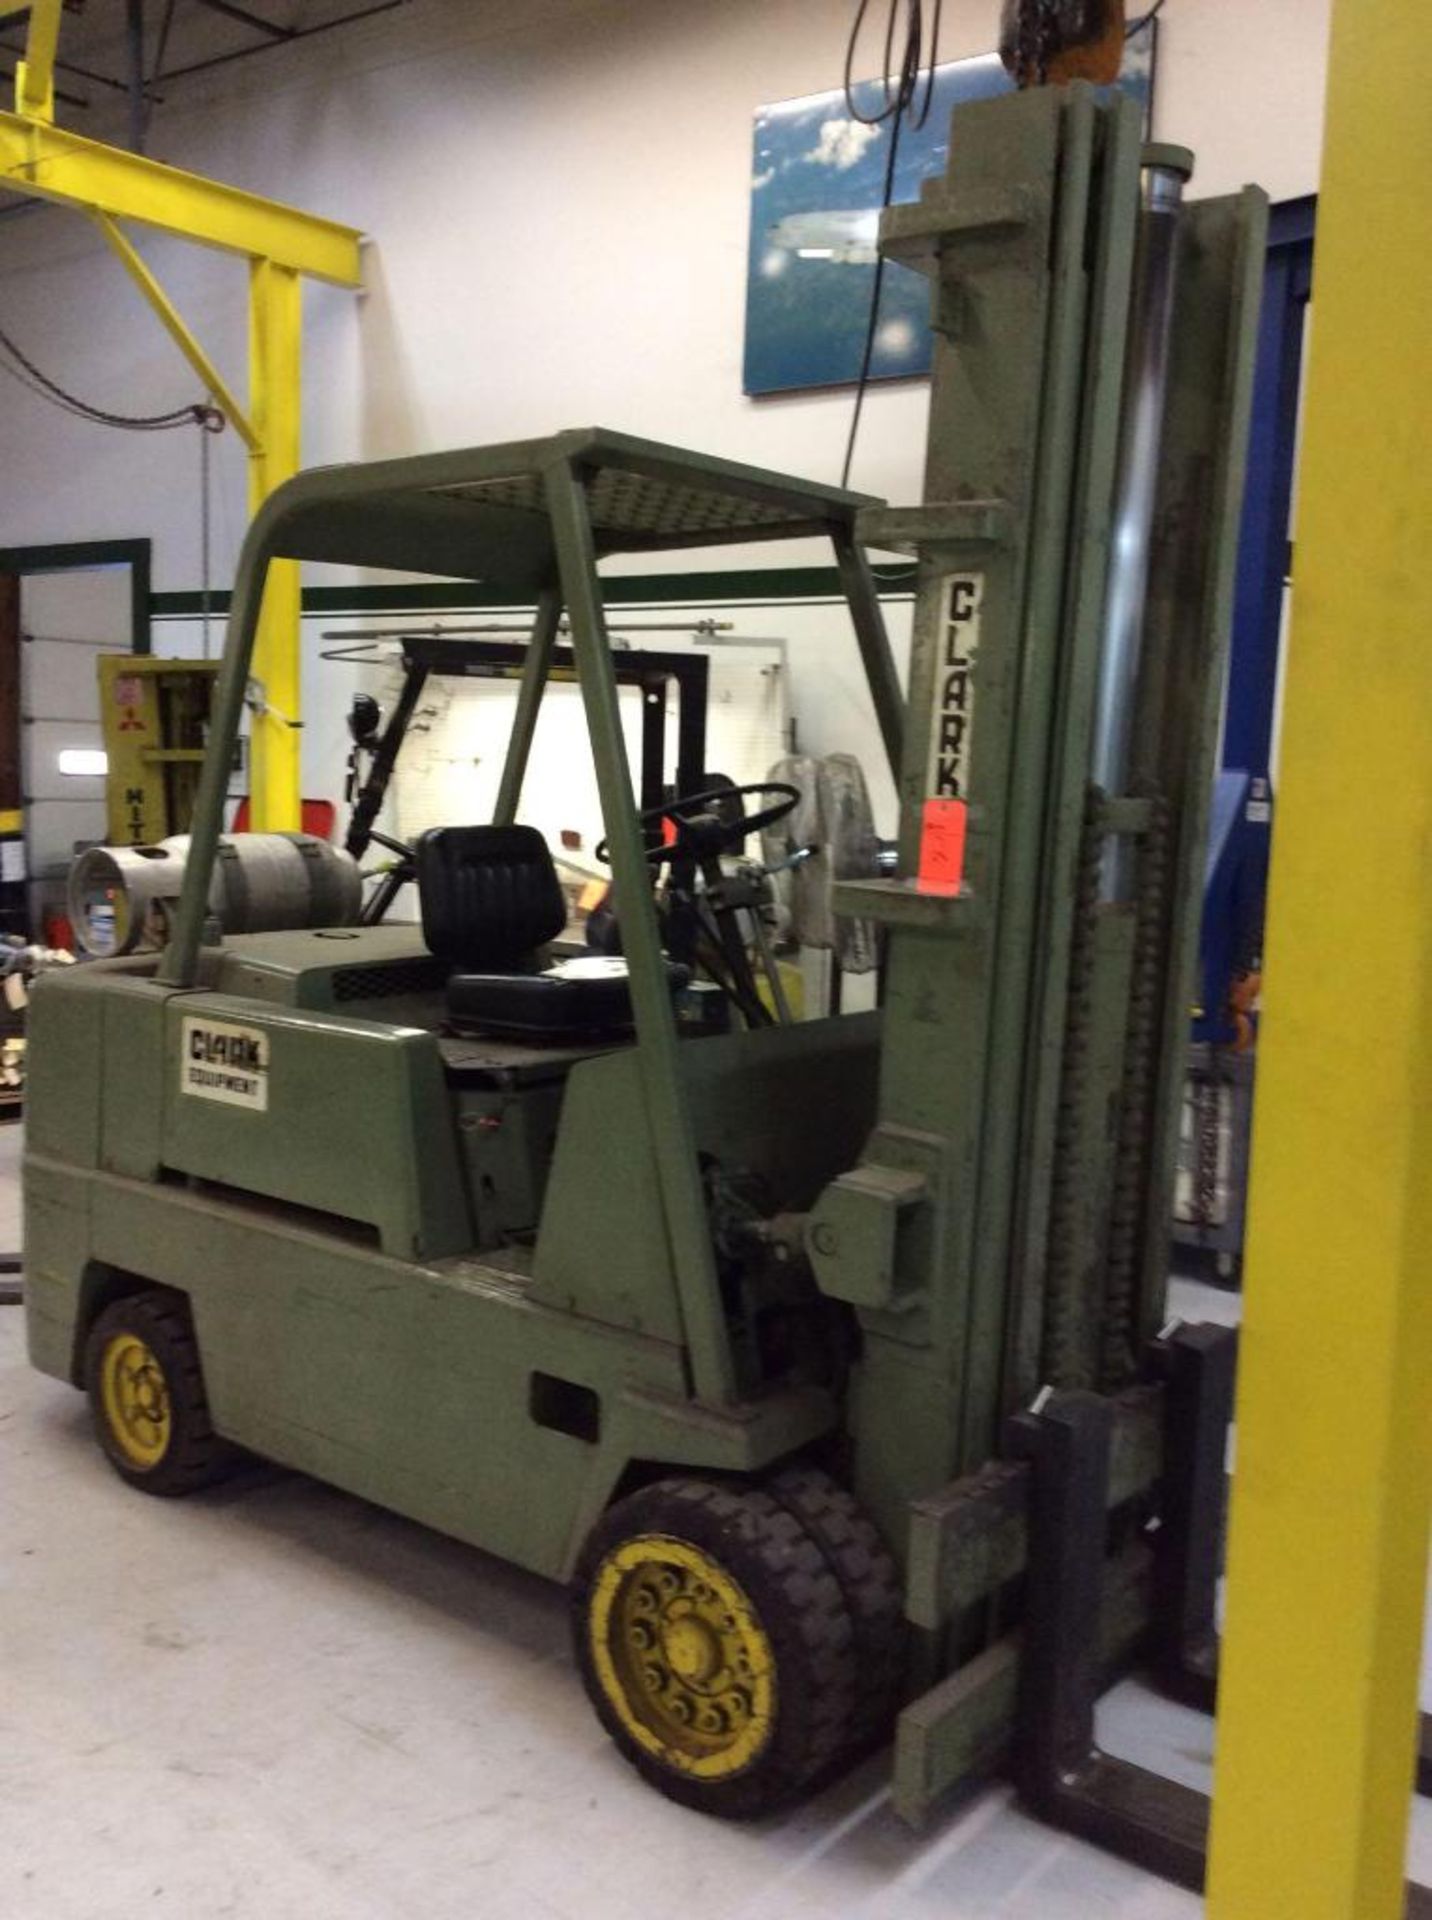 Clark, CHY120, 12,000# capacity forklift, LPG powered, 3 stage mast, 216" ht capacity, fork attachme